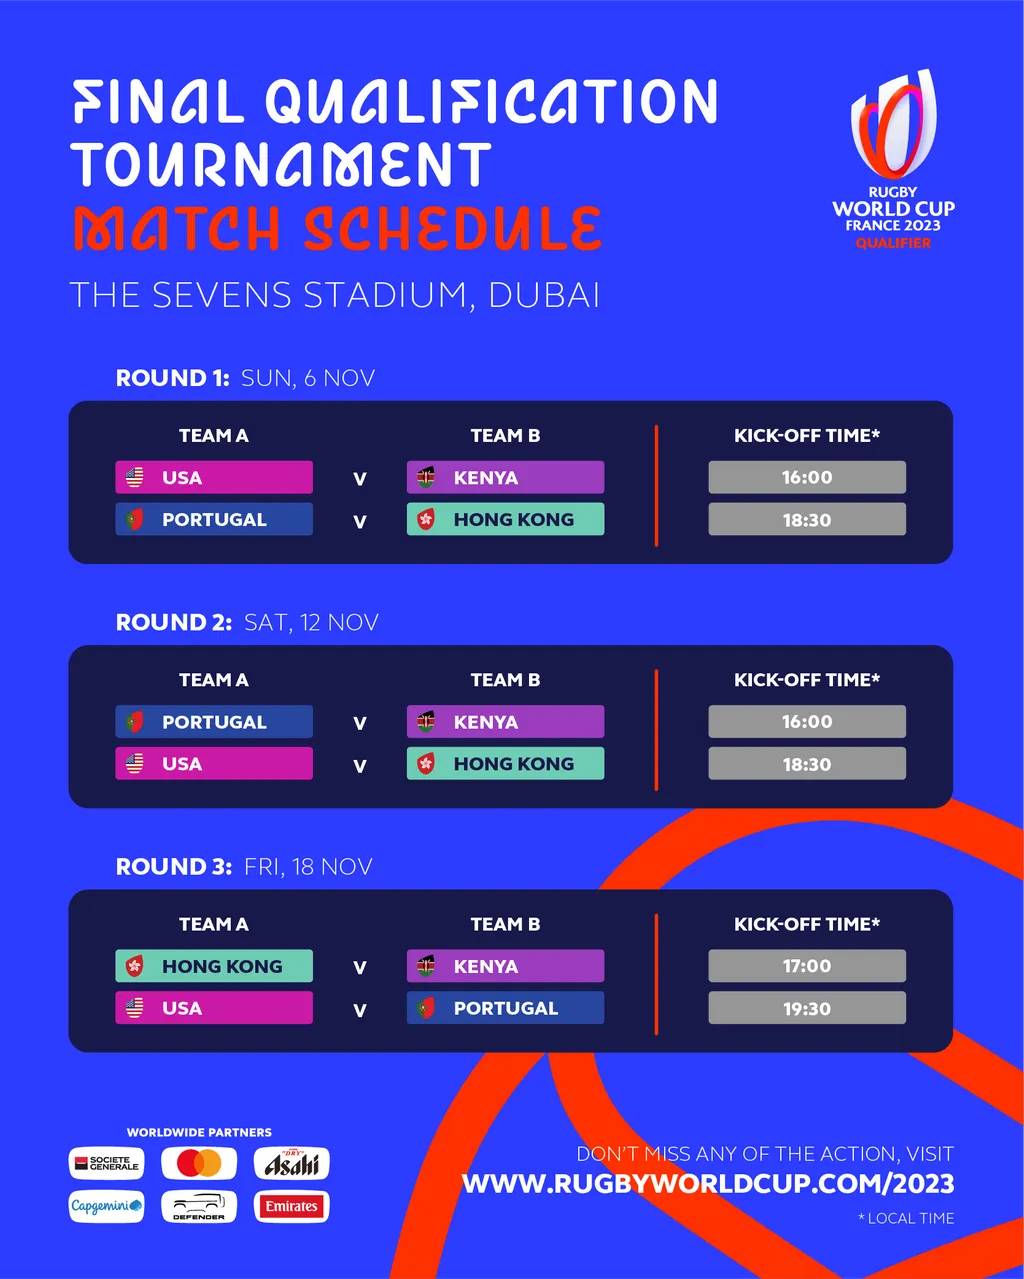 Match schedule confirmed for RWC 2023 Final Qualification Tournament